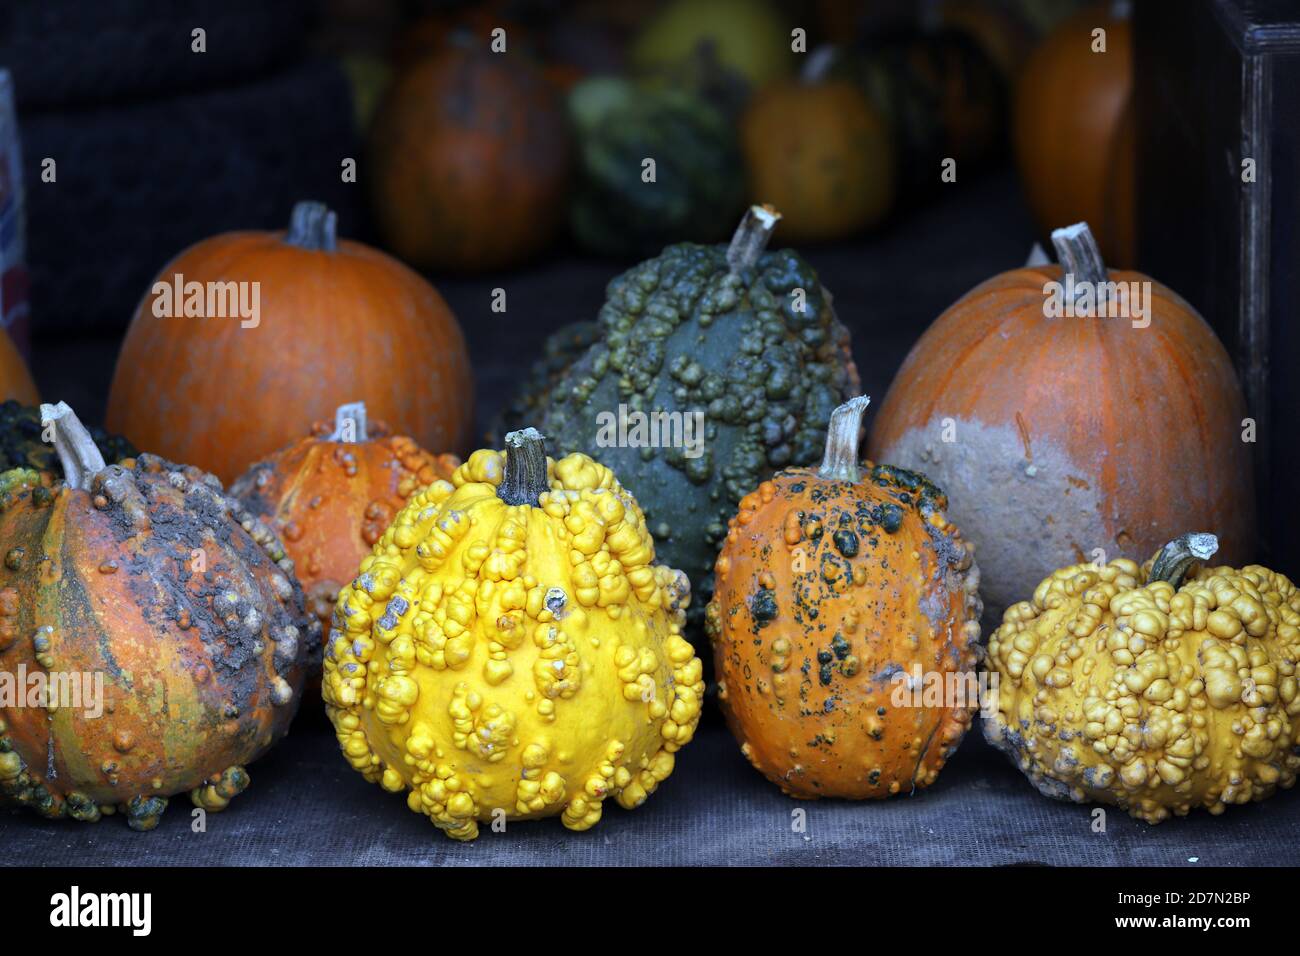 Colorful ornamental pumpkins, gourds and squashes in the street for Halloween holiday background Stock Photo